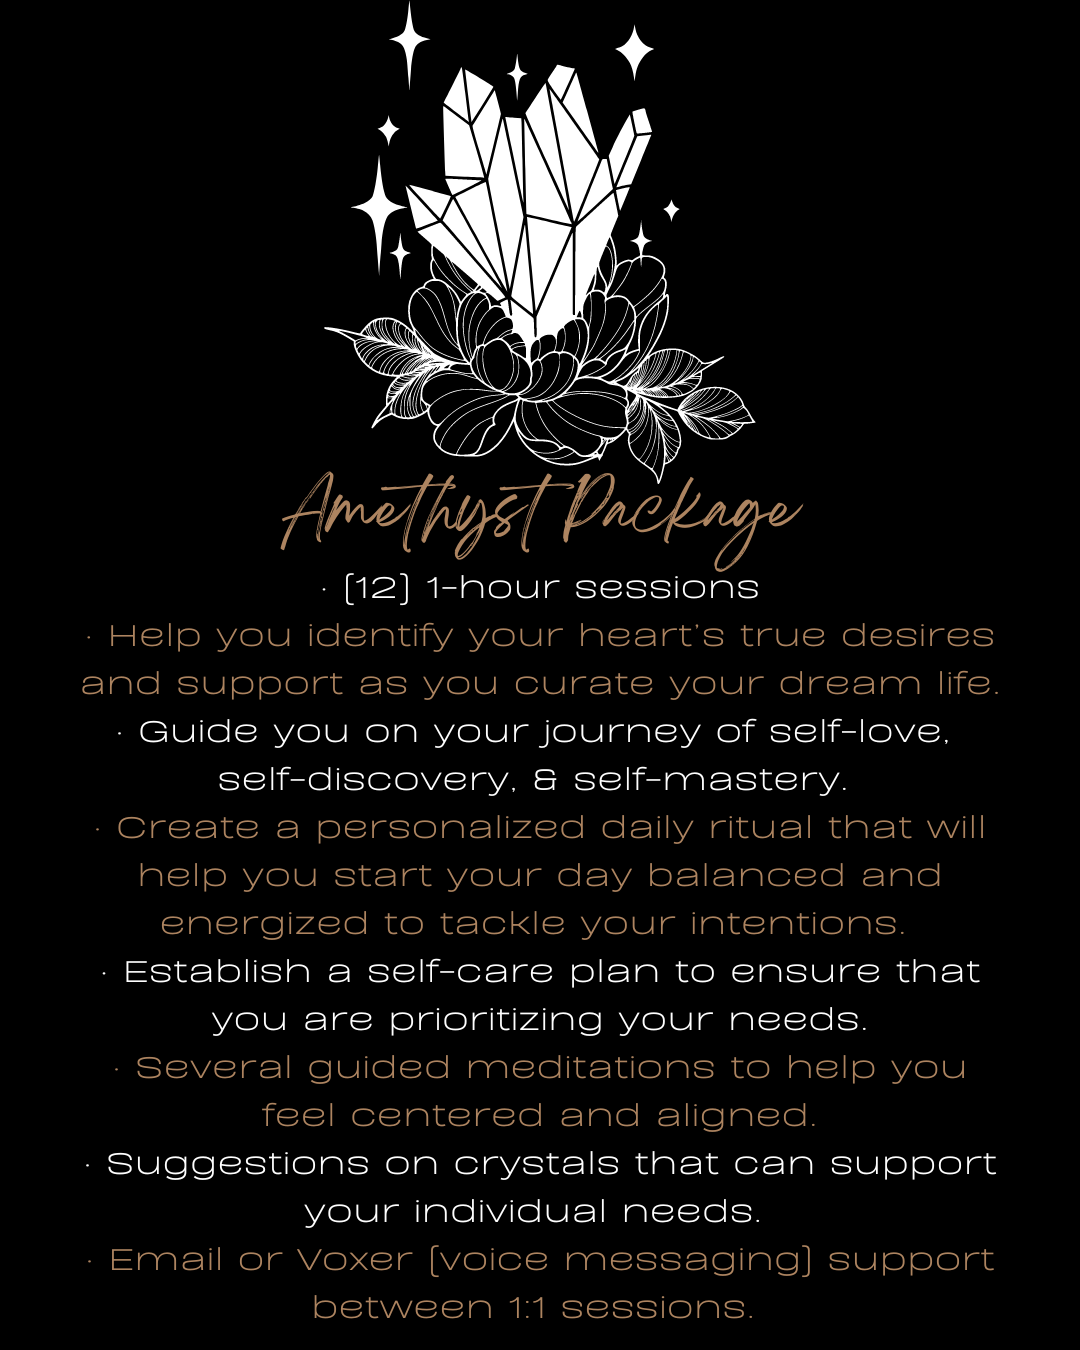 Life Coaching - Amethyst Package